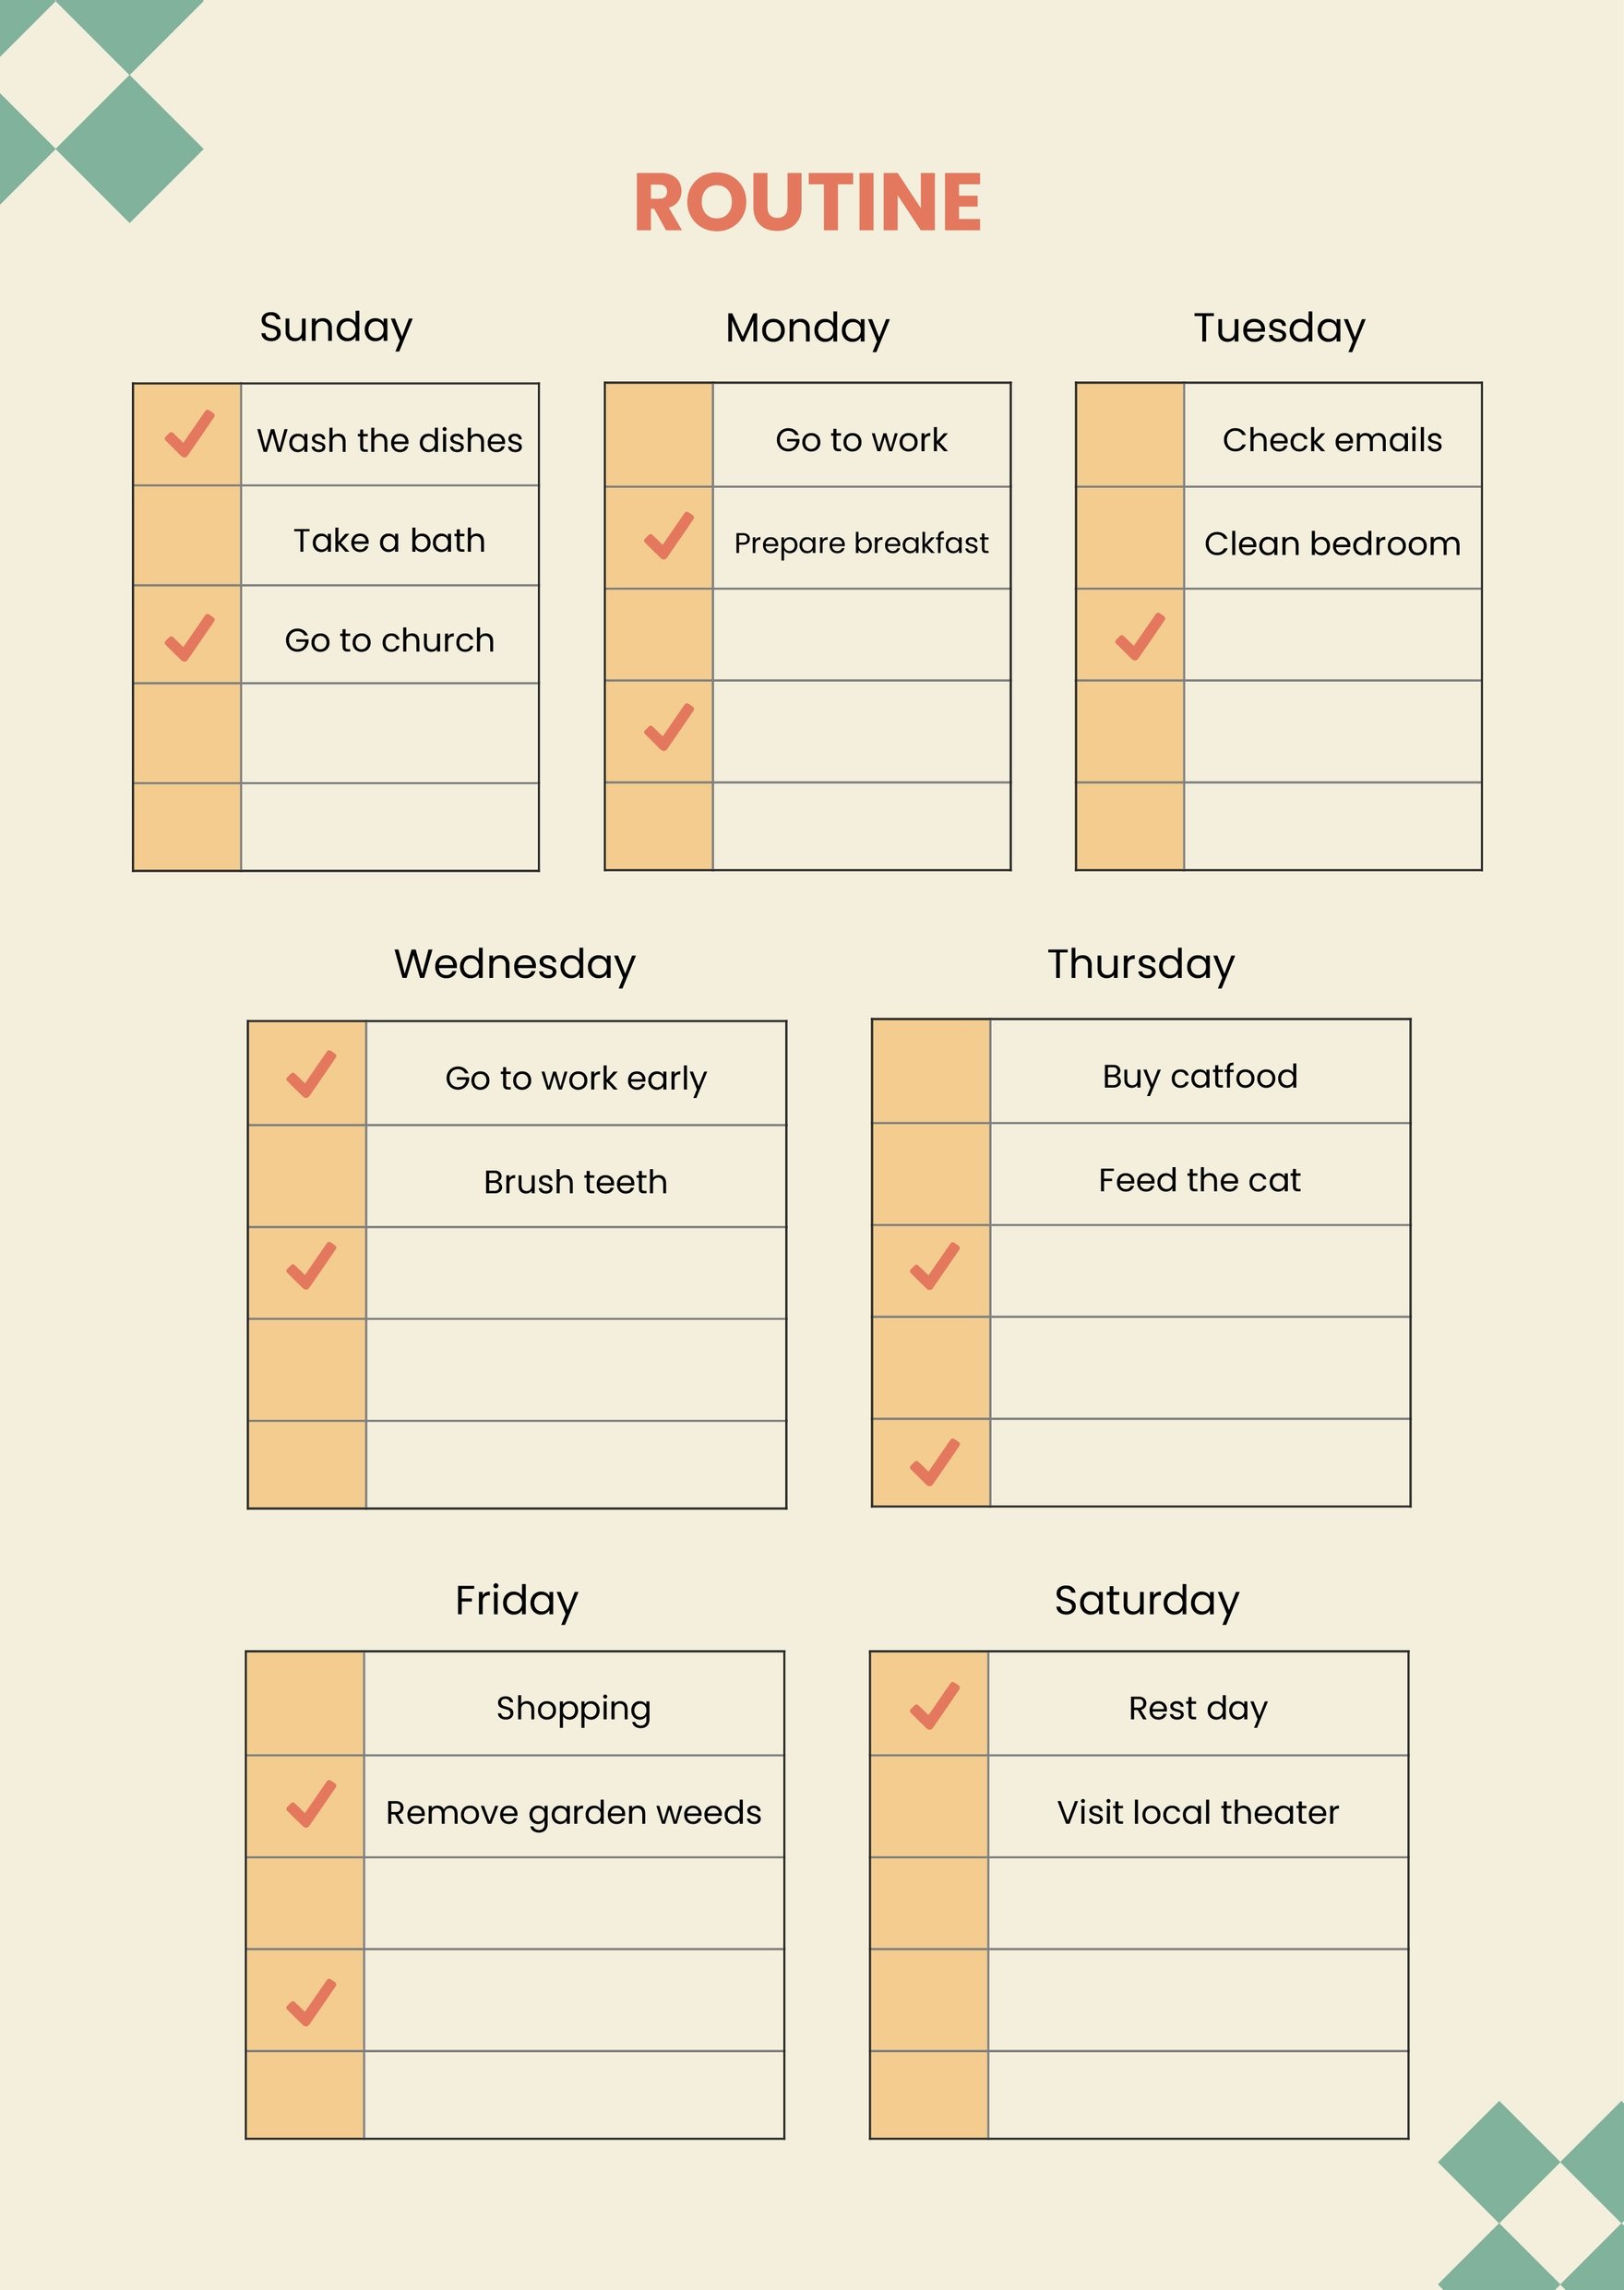 Free Personalized Routine Chart in PDF, Illustrator